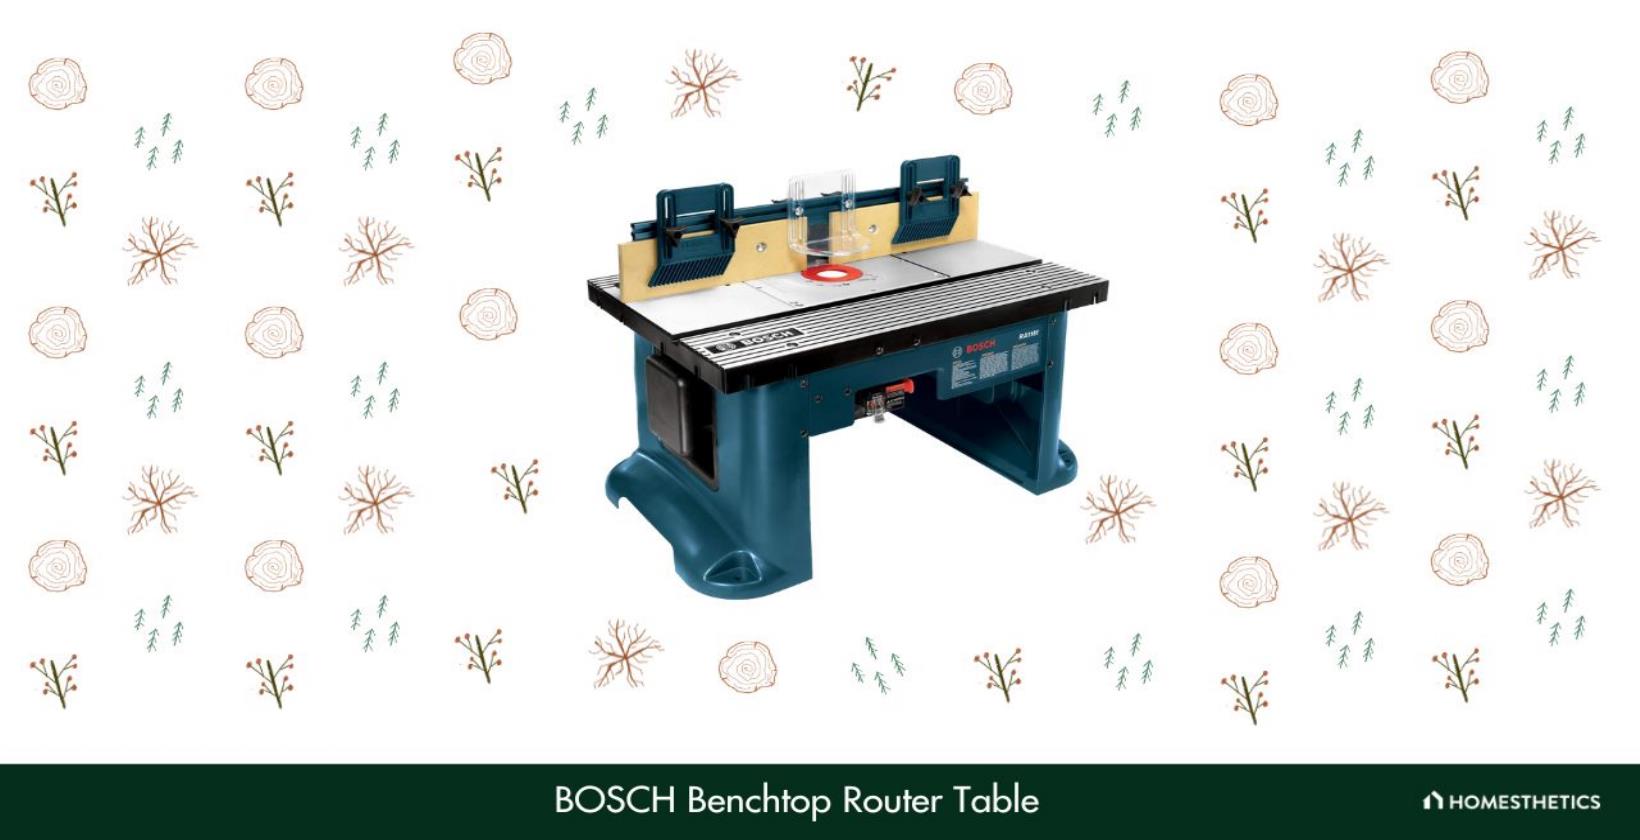 1. BOSCH Benchtop Router Table